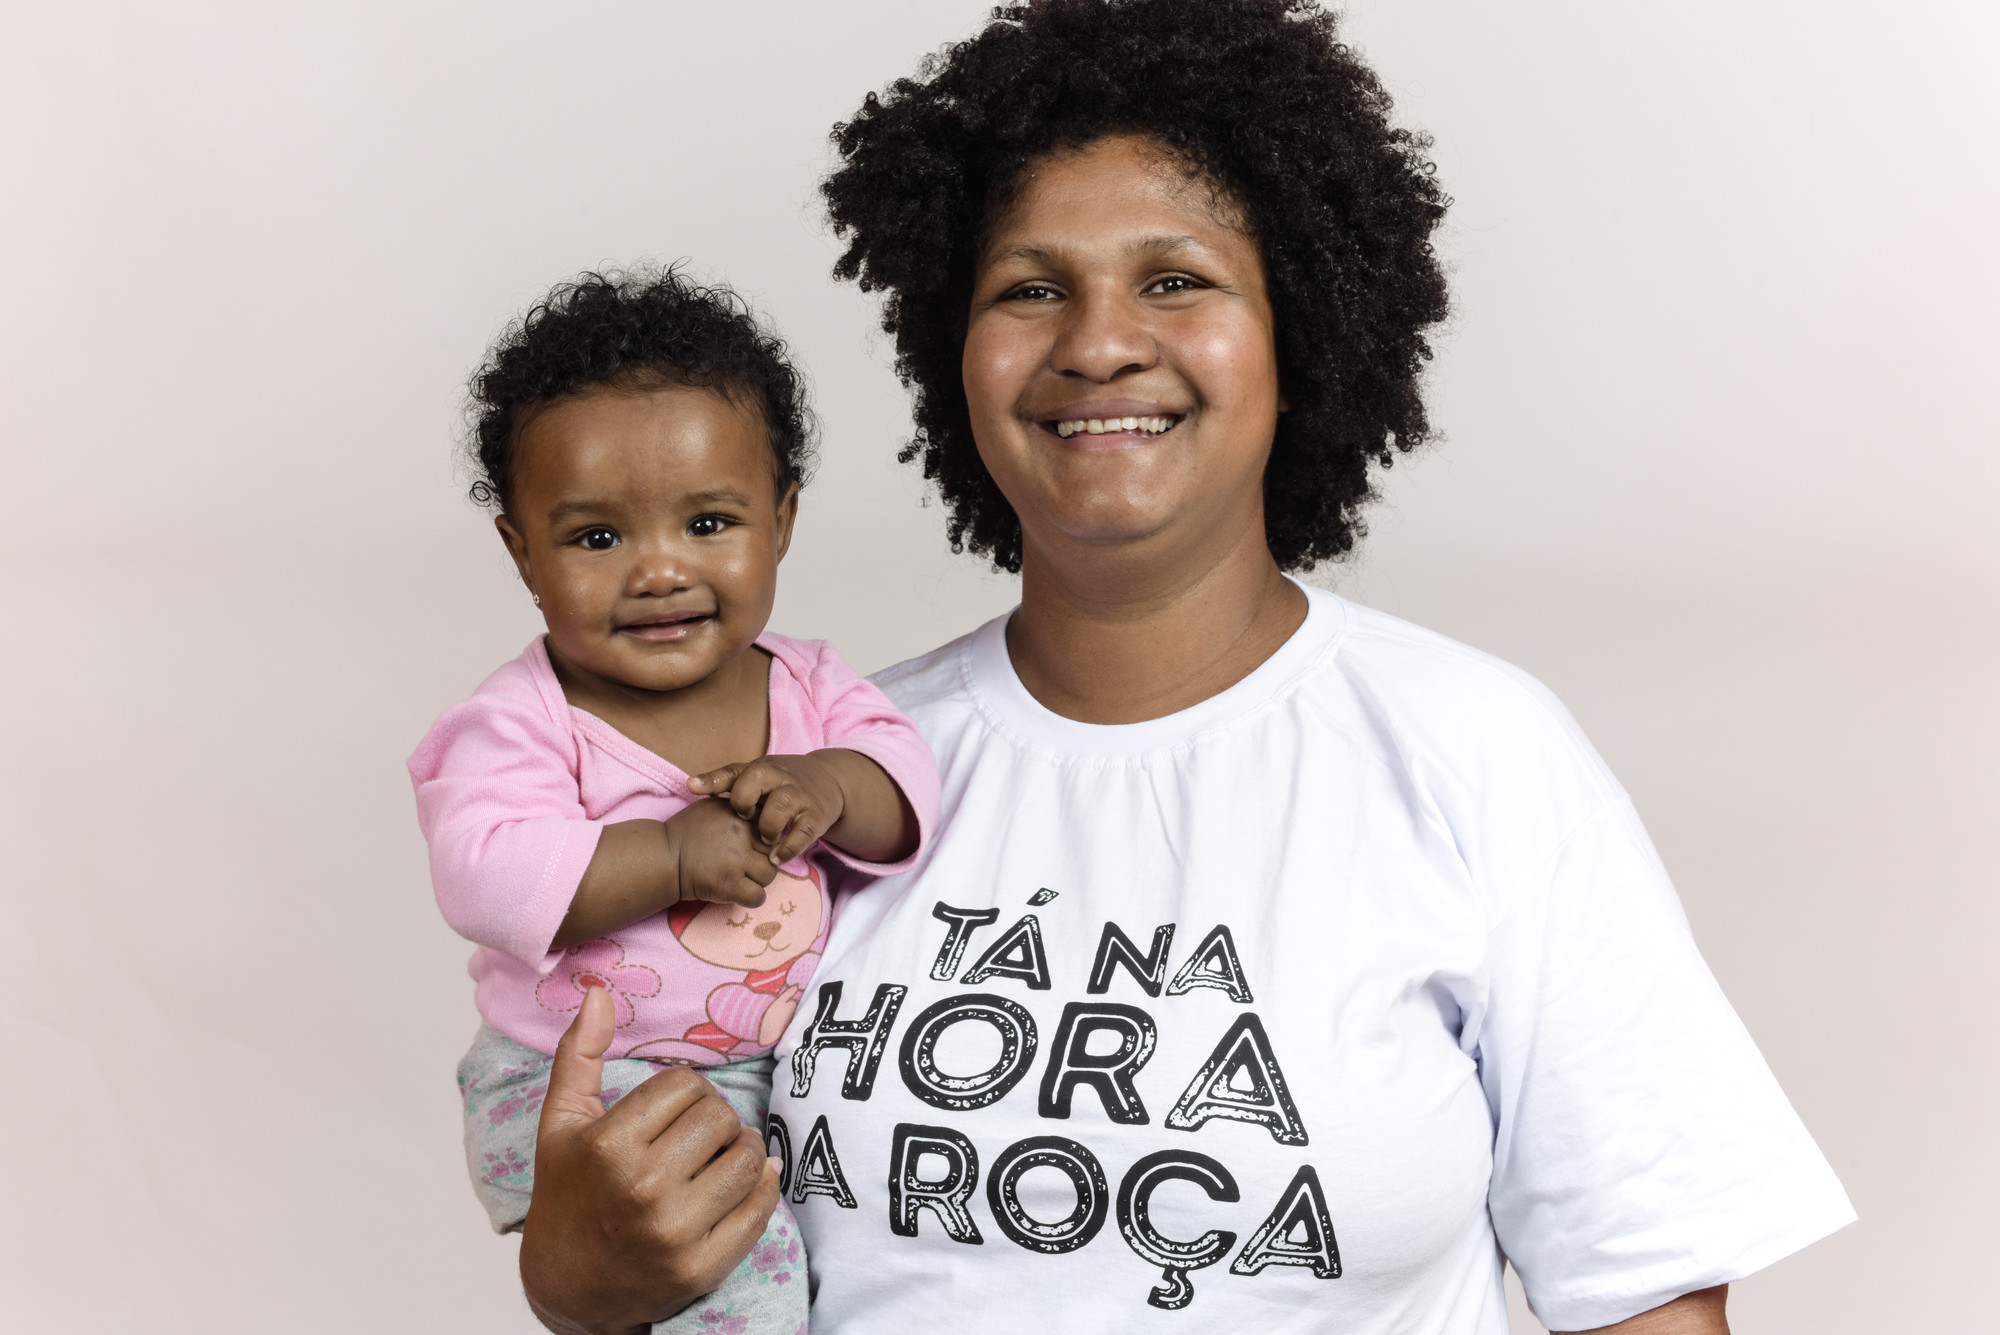 Neire Alves da Silva, from Quilombo Ivaporunduva, with her daughter Ana Julia Alves Pupo in her arms, in the campaign "It's time for the roça", which aimed to pressure the government of São Paulo to issue licenses for traditional quilombola gardens. The launch of the campaign took place during the 11th Seeds and Seedlings Exchange Fair of the Quilombola Communities of Vale do Ribeira, Eldorado @Claudio Tavares / ISA